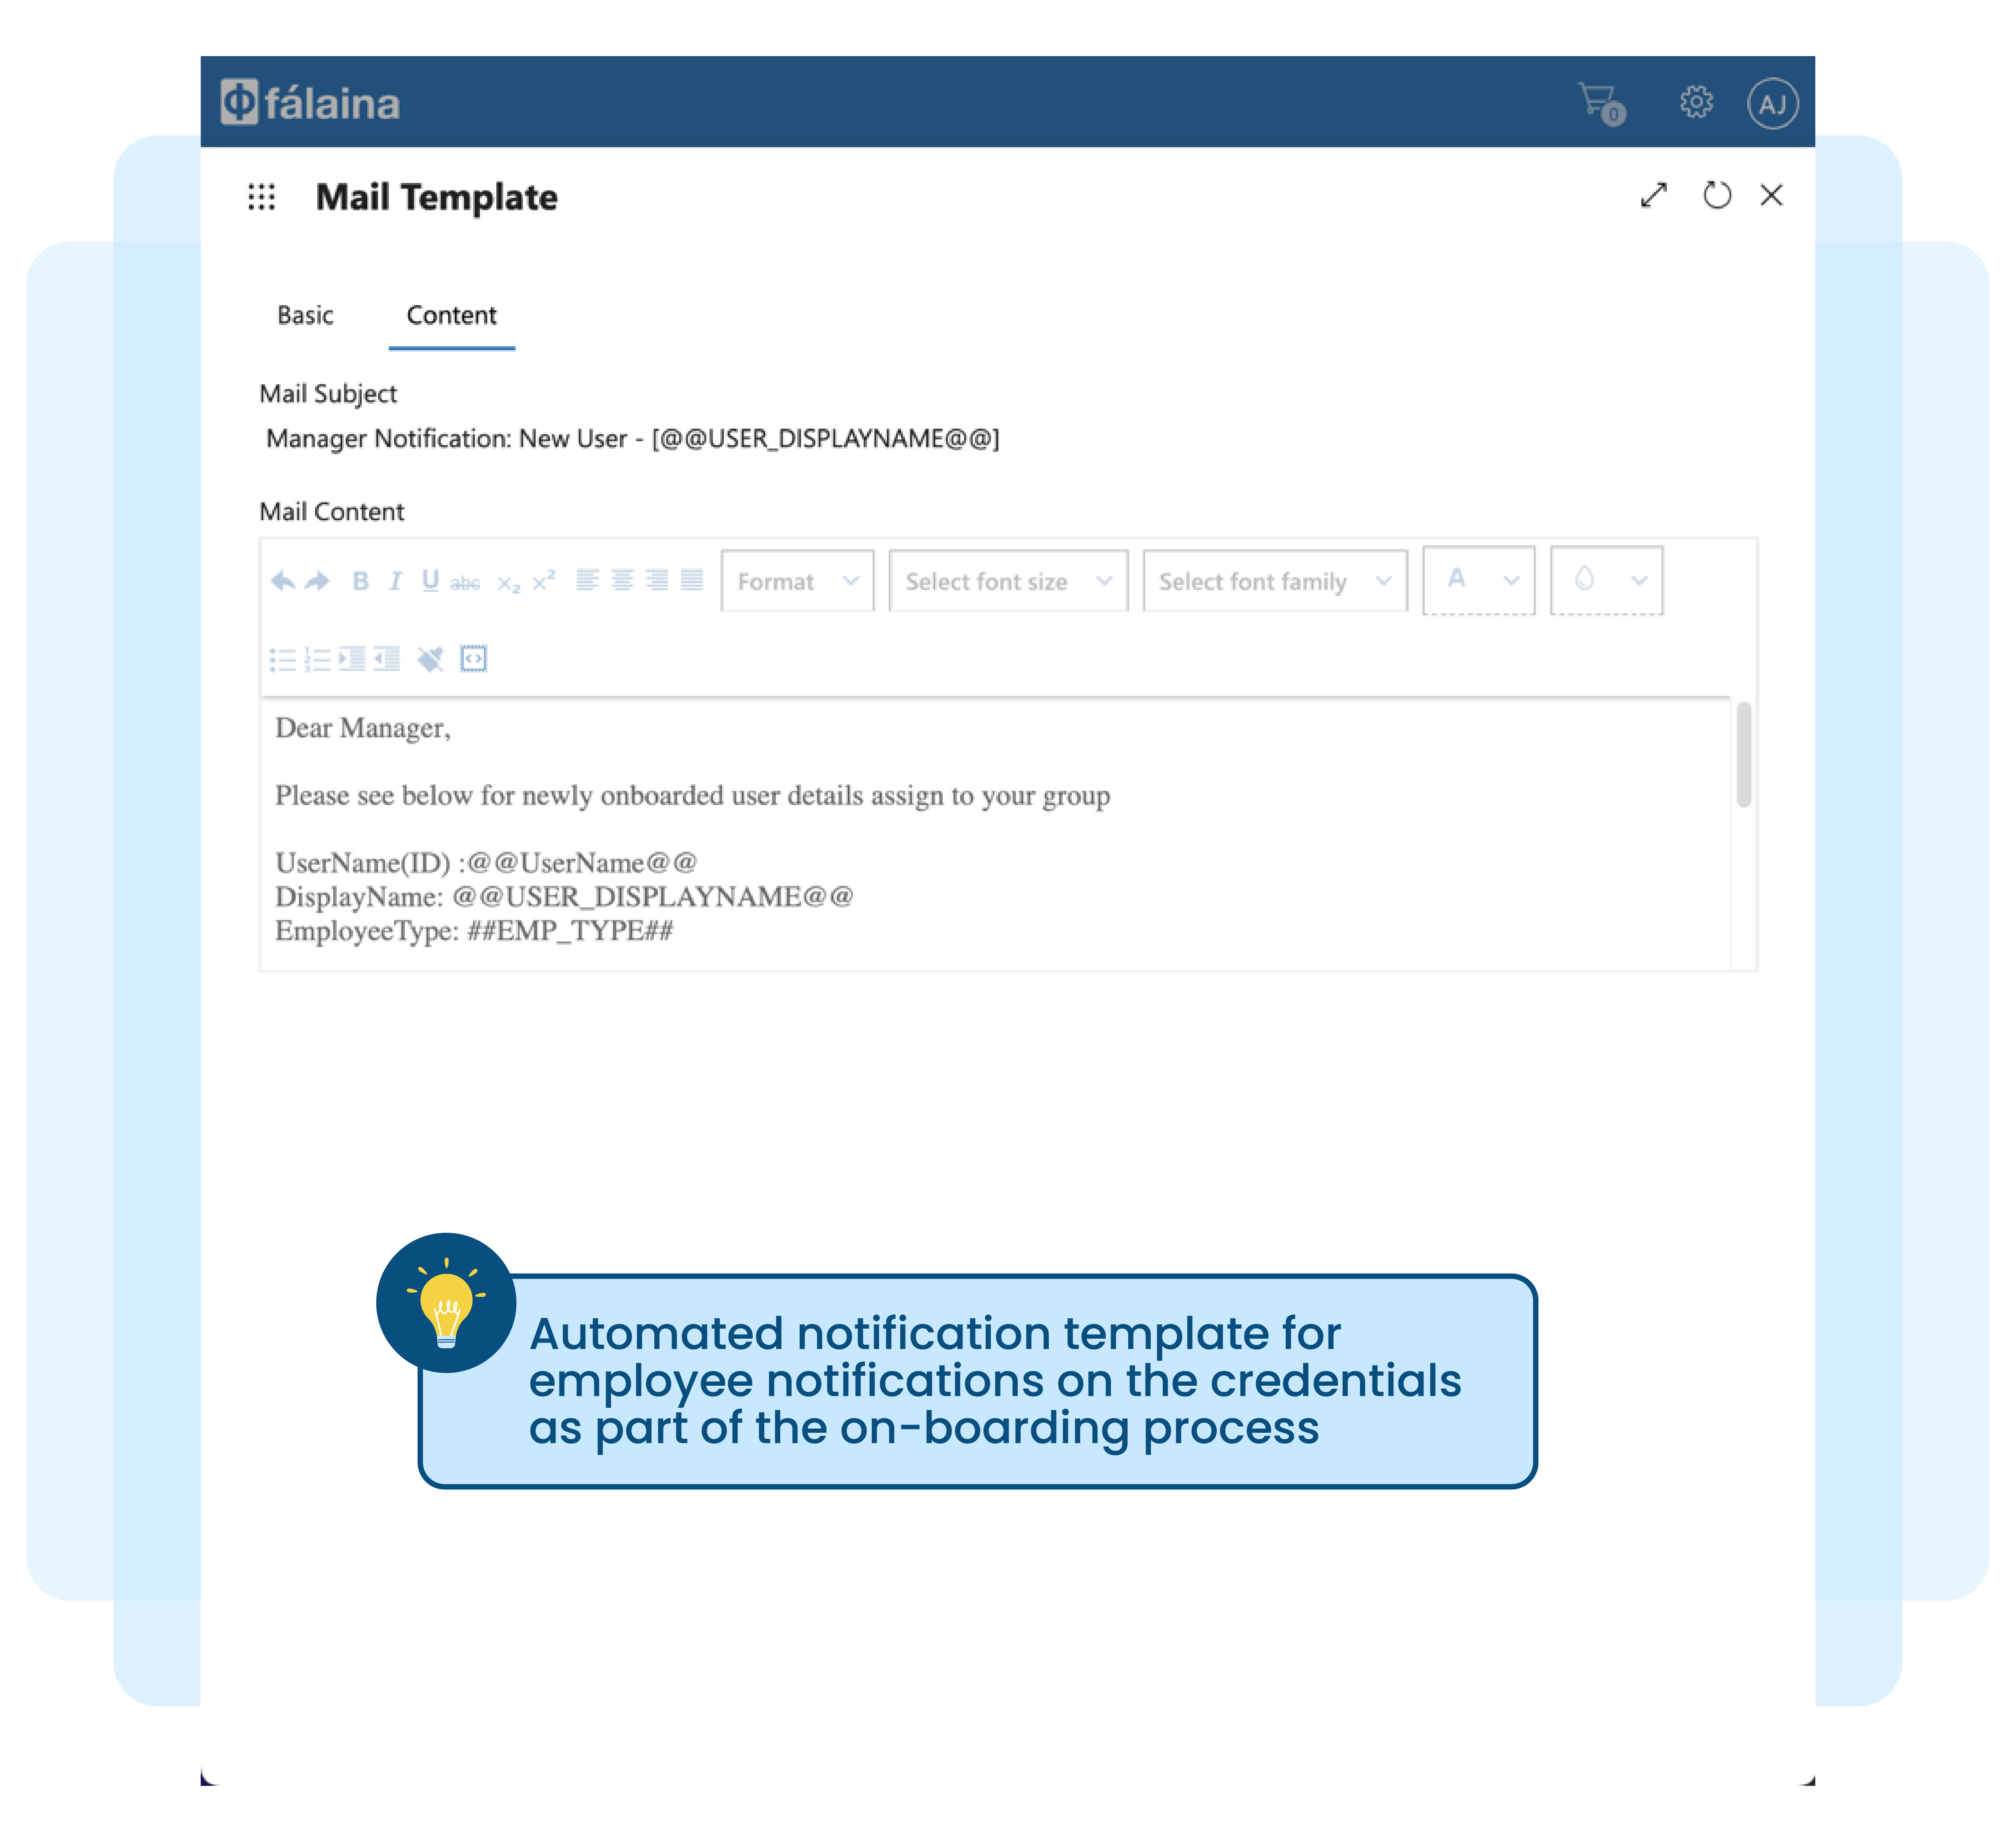 Automated notification template for employee notifications on the credentials as part of the on-boarding process